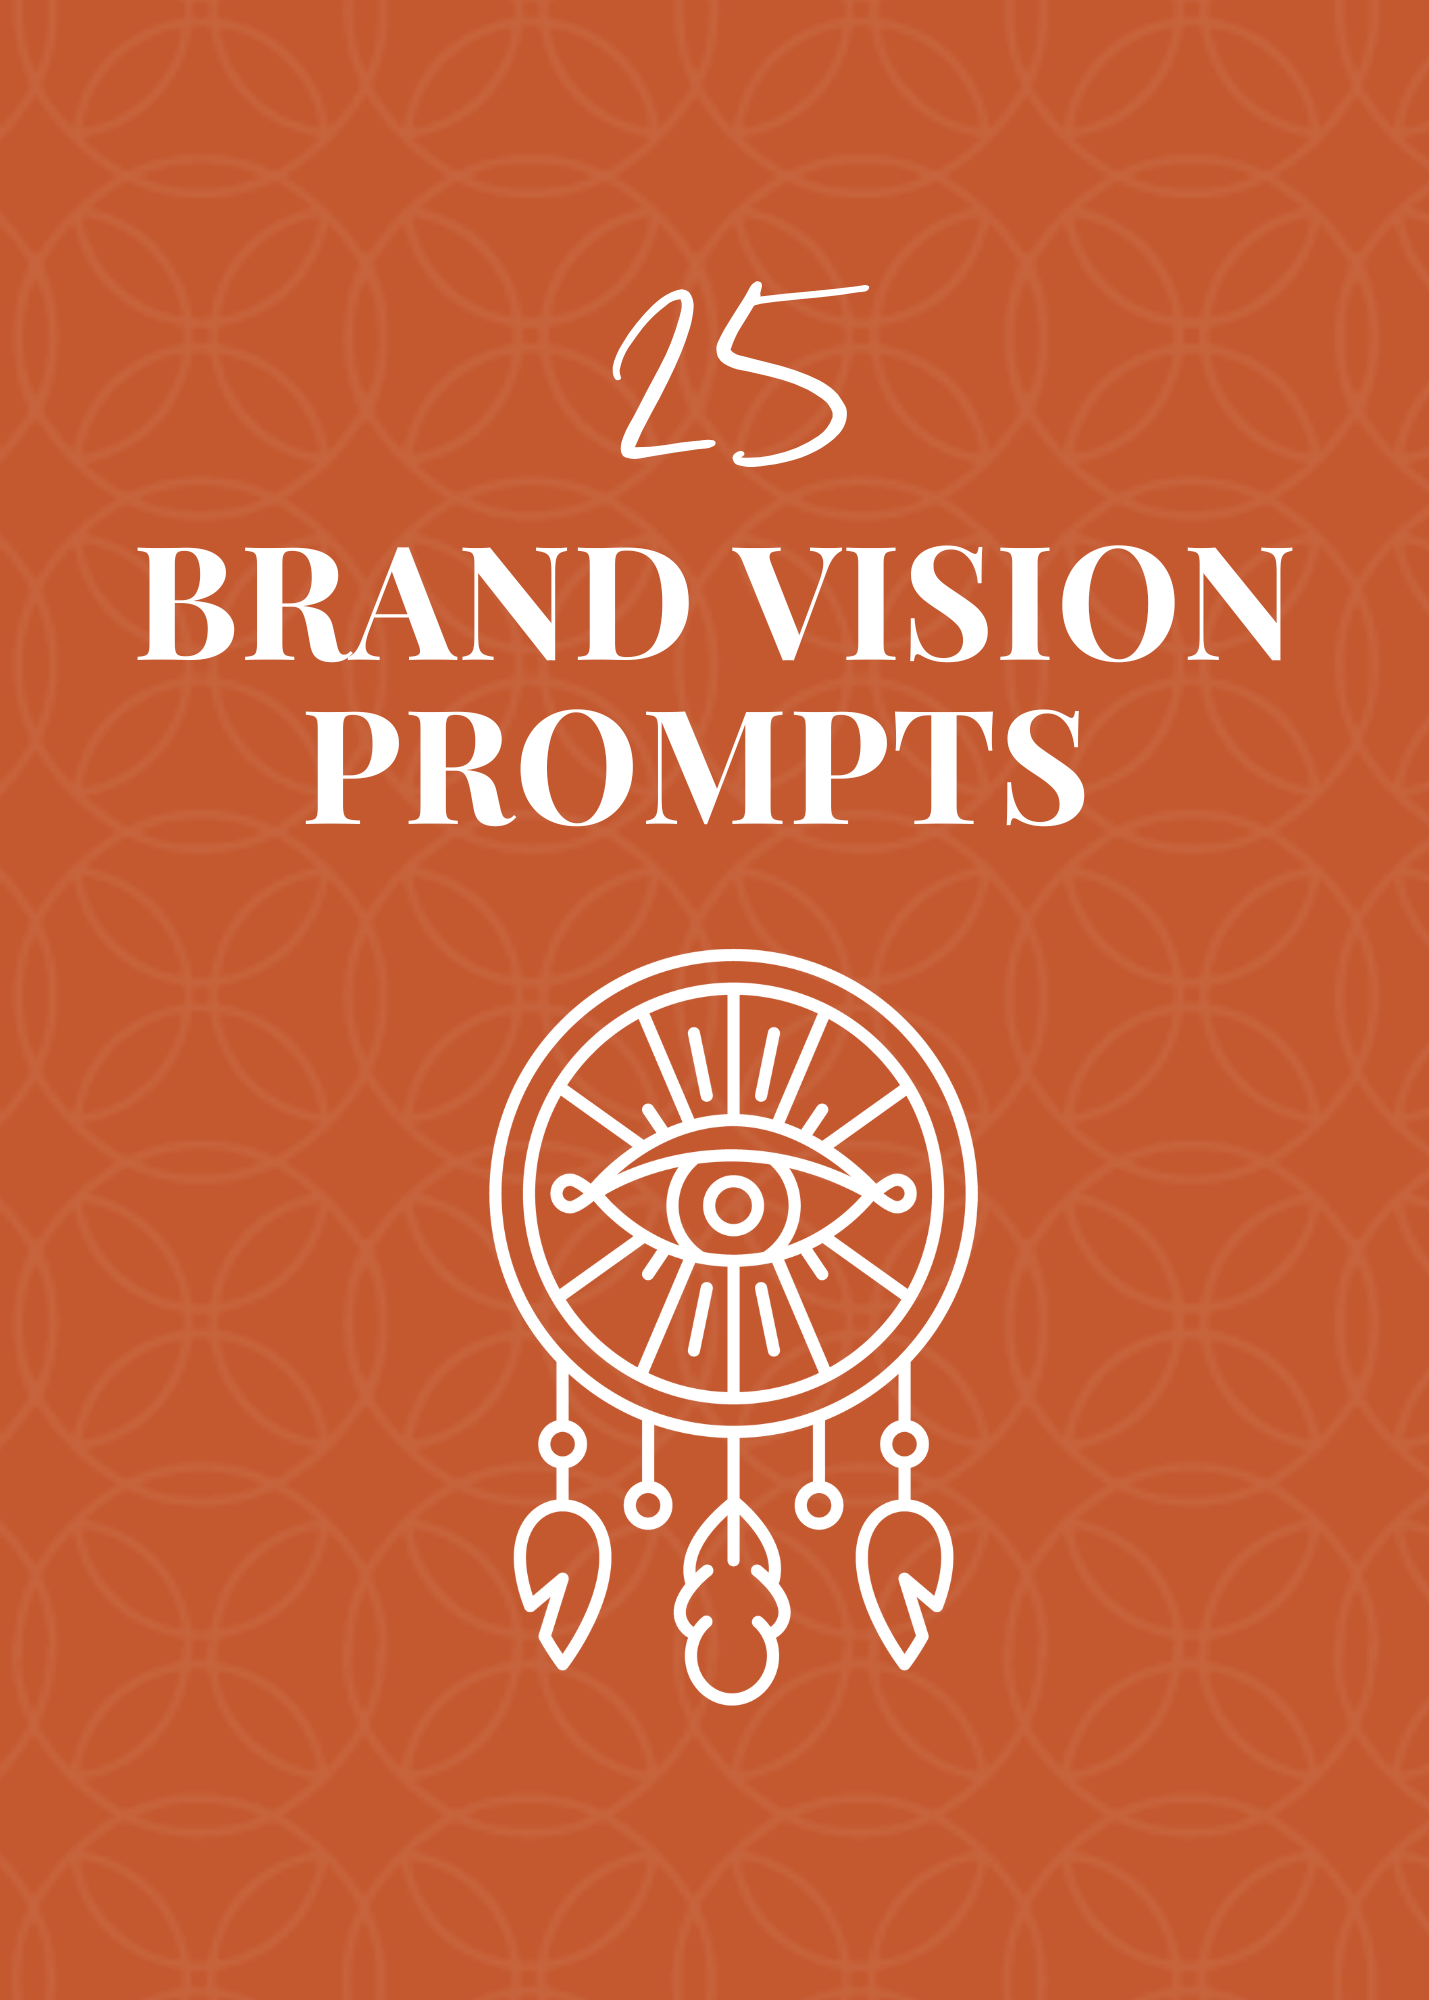 Freebie and Vision Brand Prompts - Alpana Aras: Empowering Women ...